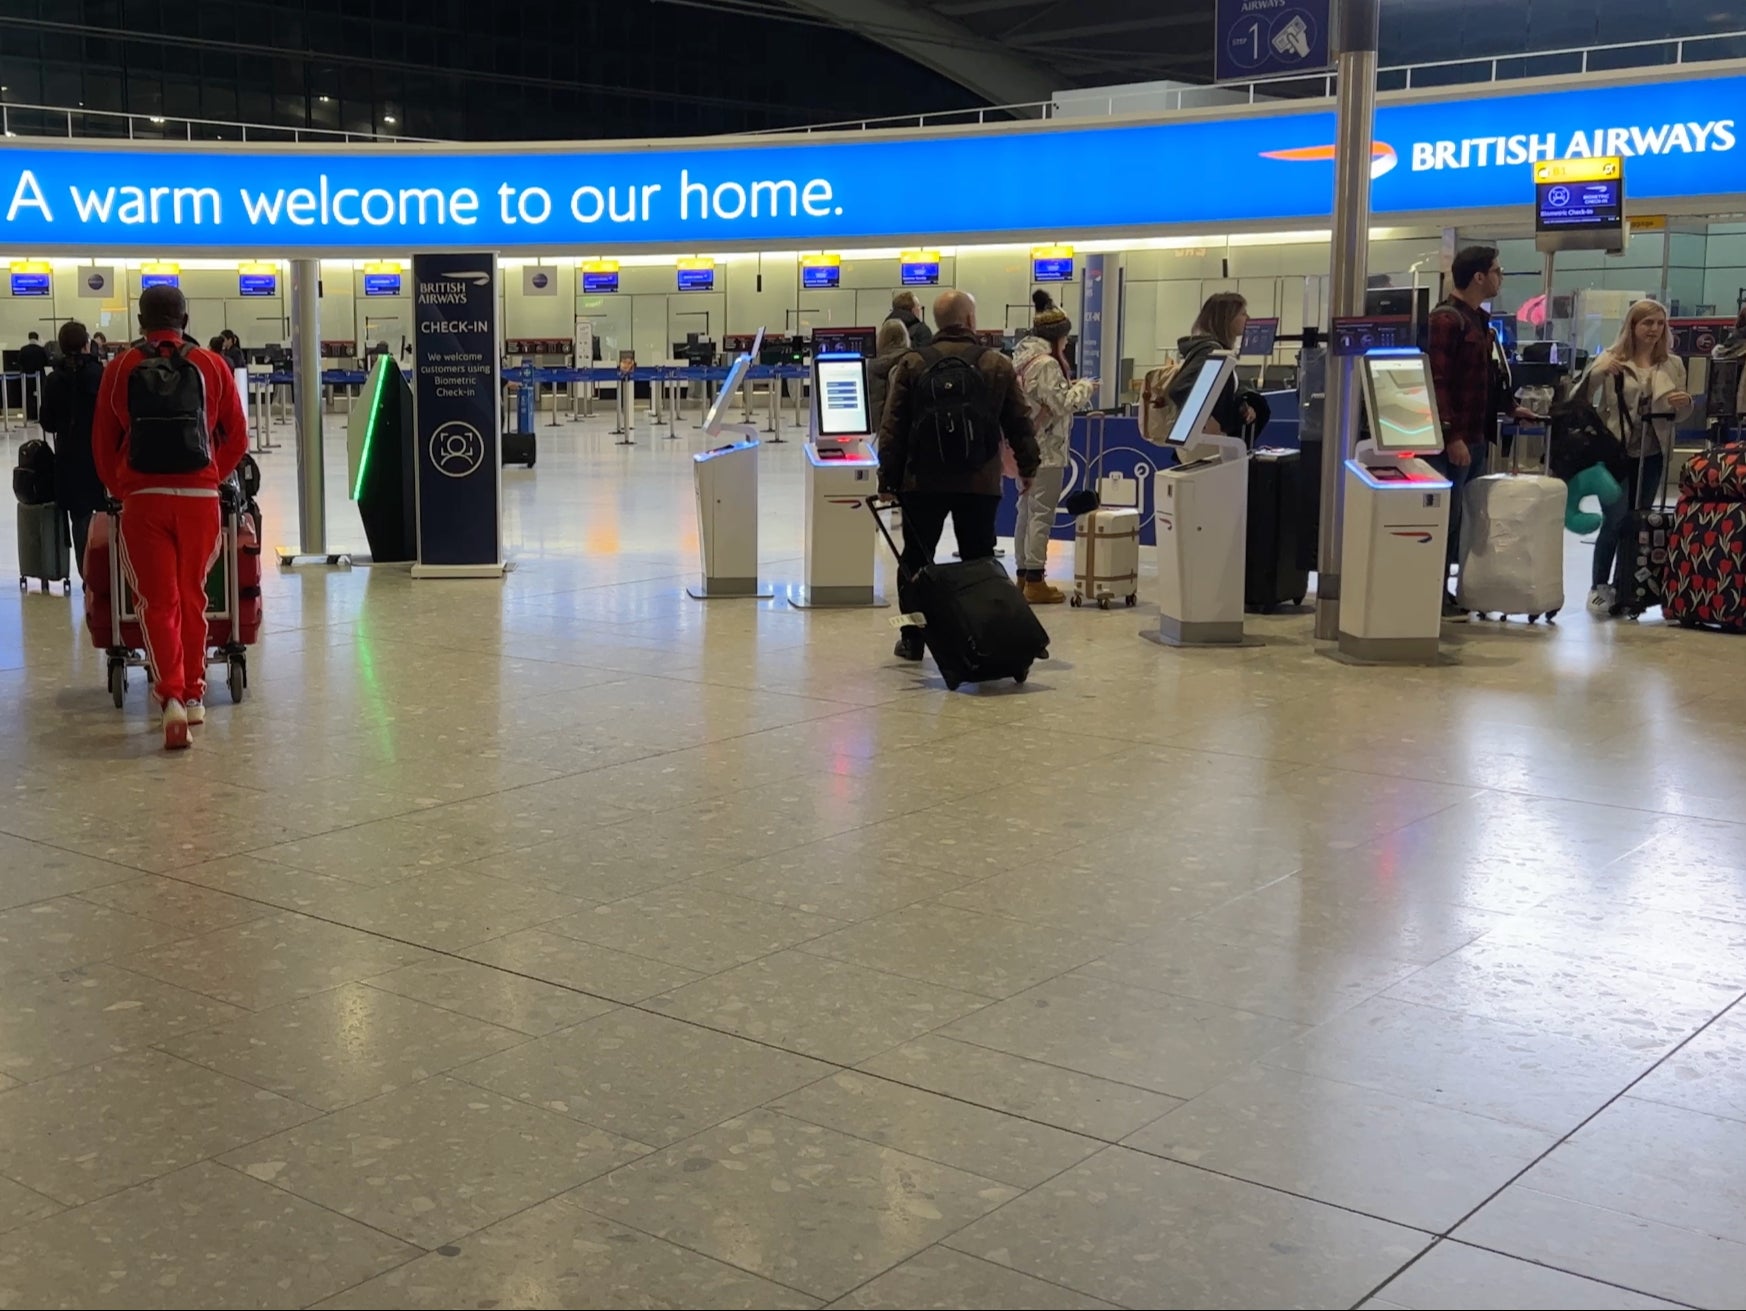 Happy landing? British Airways told many passengers arriving at Heathrow Terminal 5 to go home without their luggage (file photo)